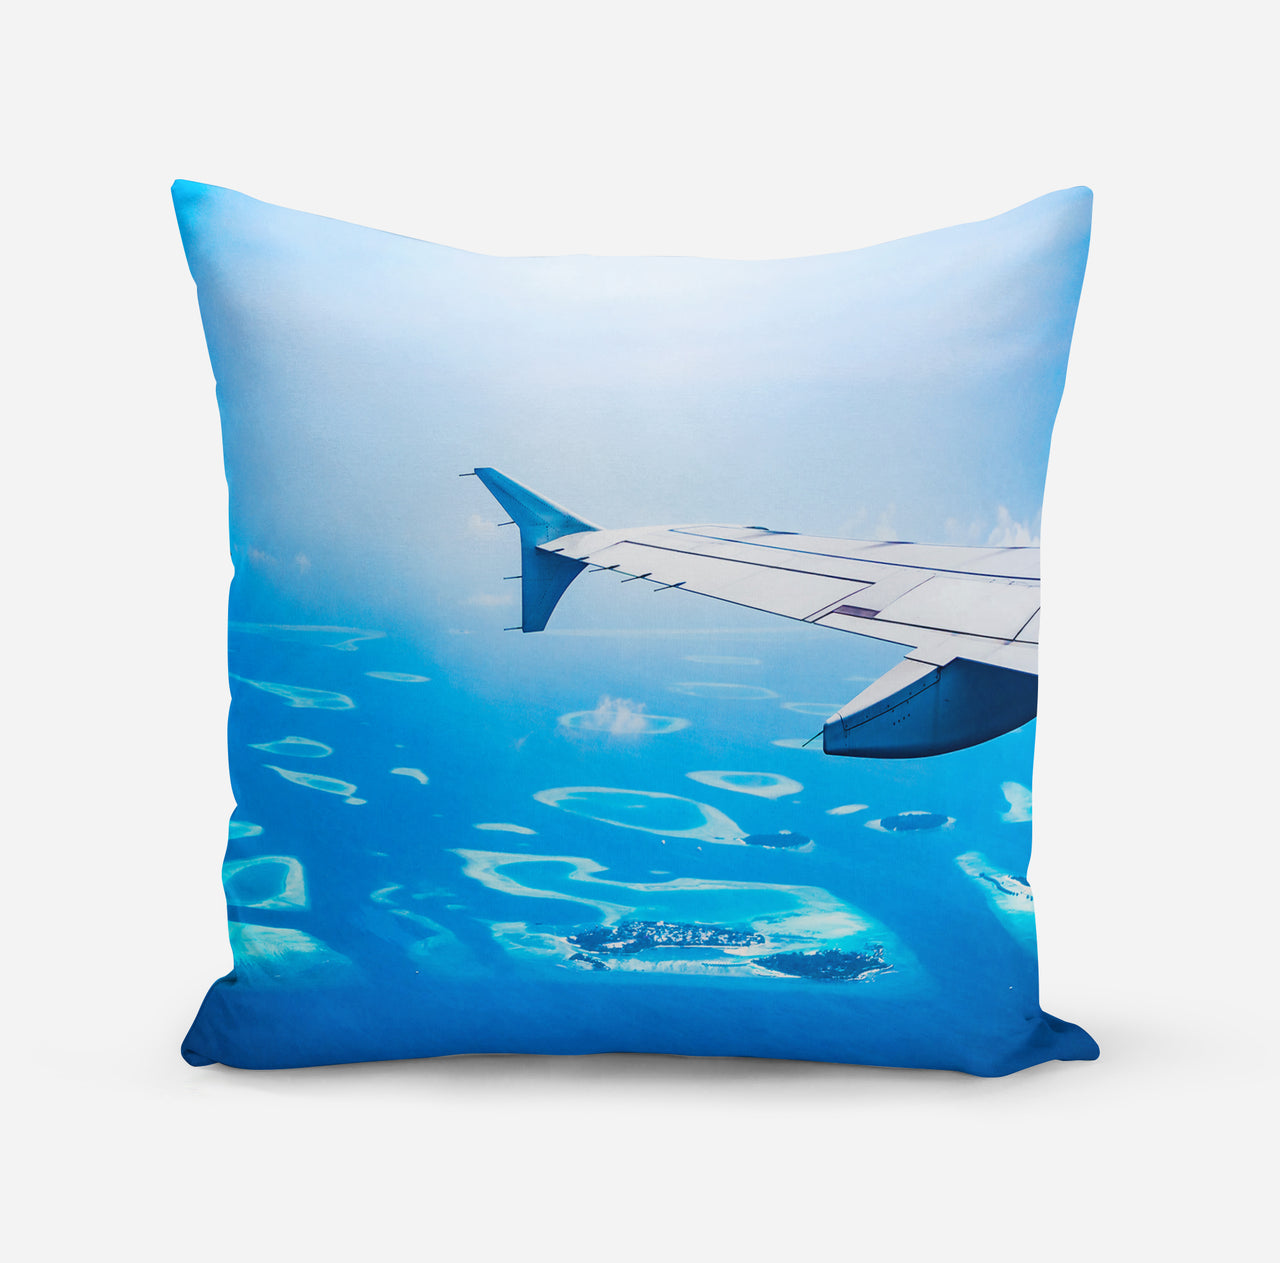 Outstanding View Through Airplane Wing Designed Pillows